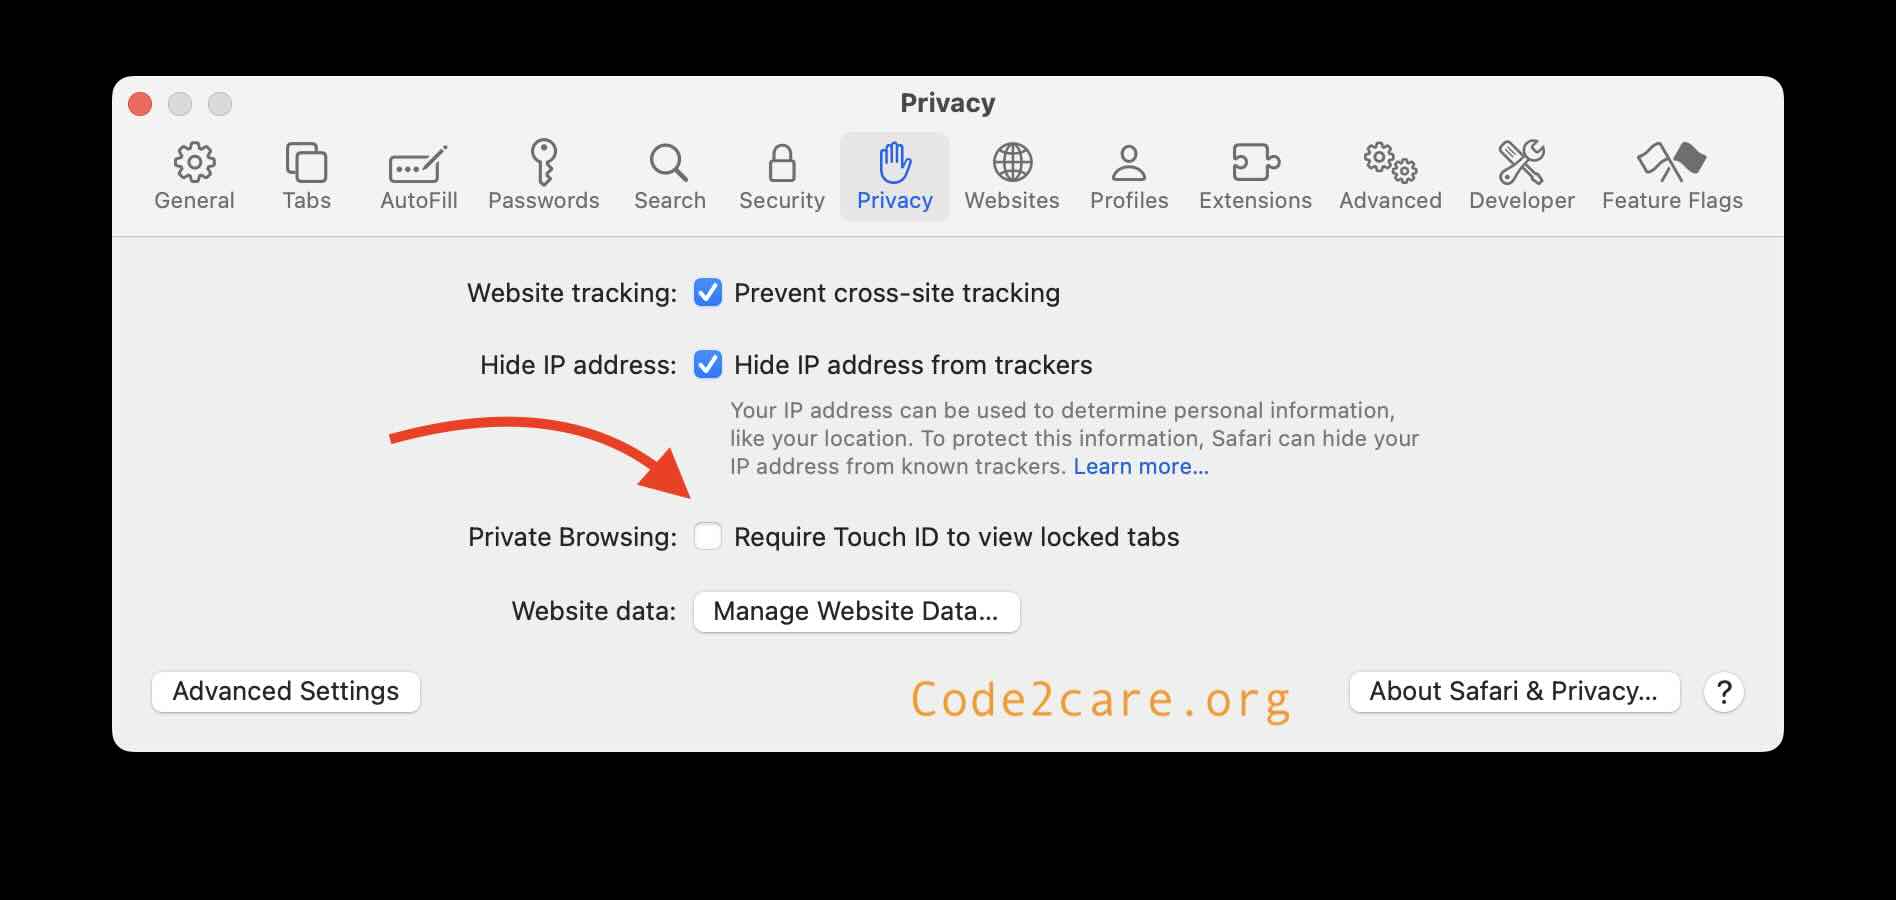 Privacy tab - Require Touch ID to view locked tabs